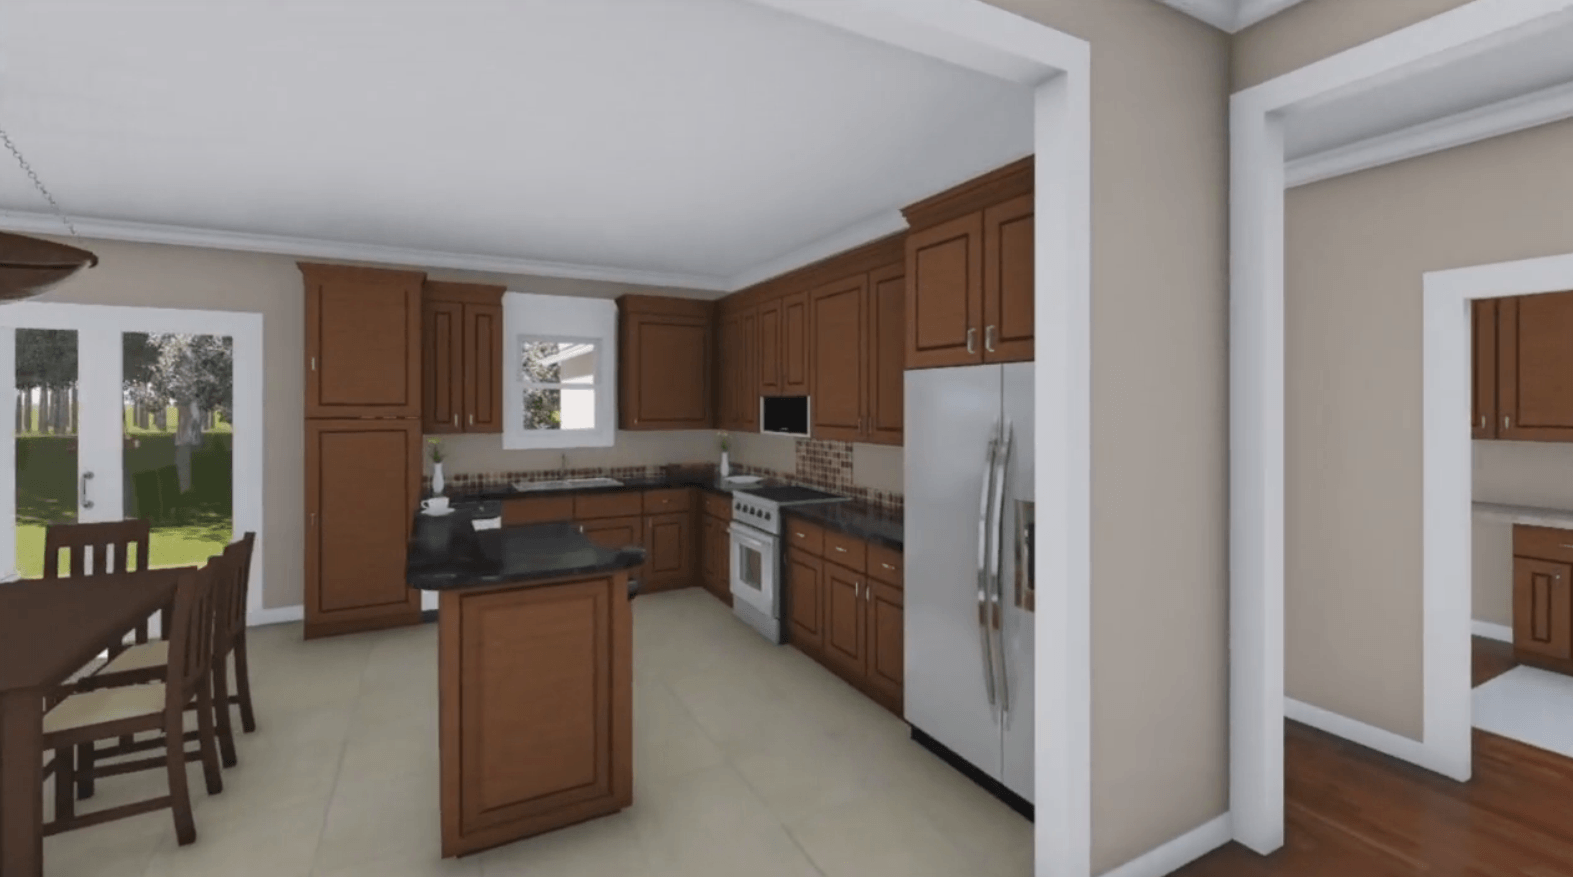 HPG-1888B-1 kitchen in home plans